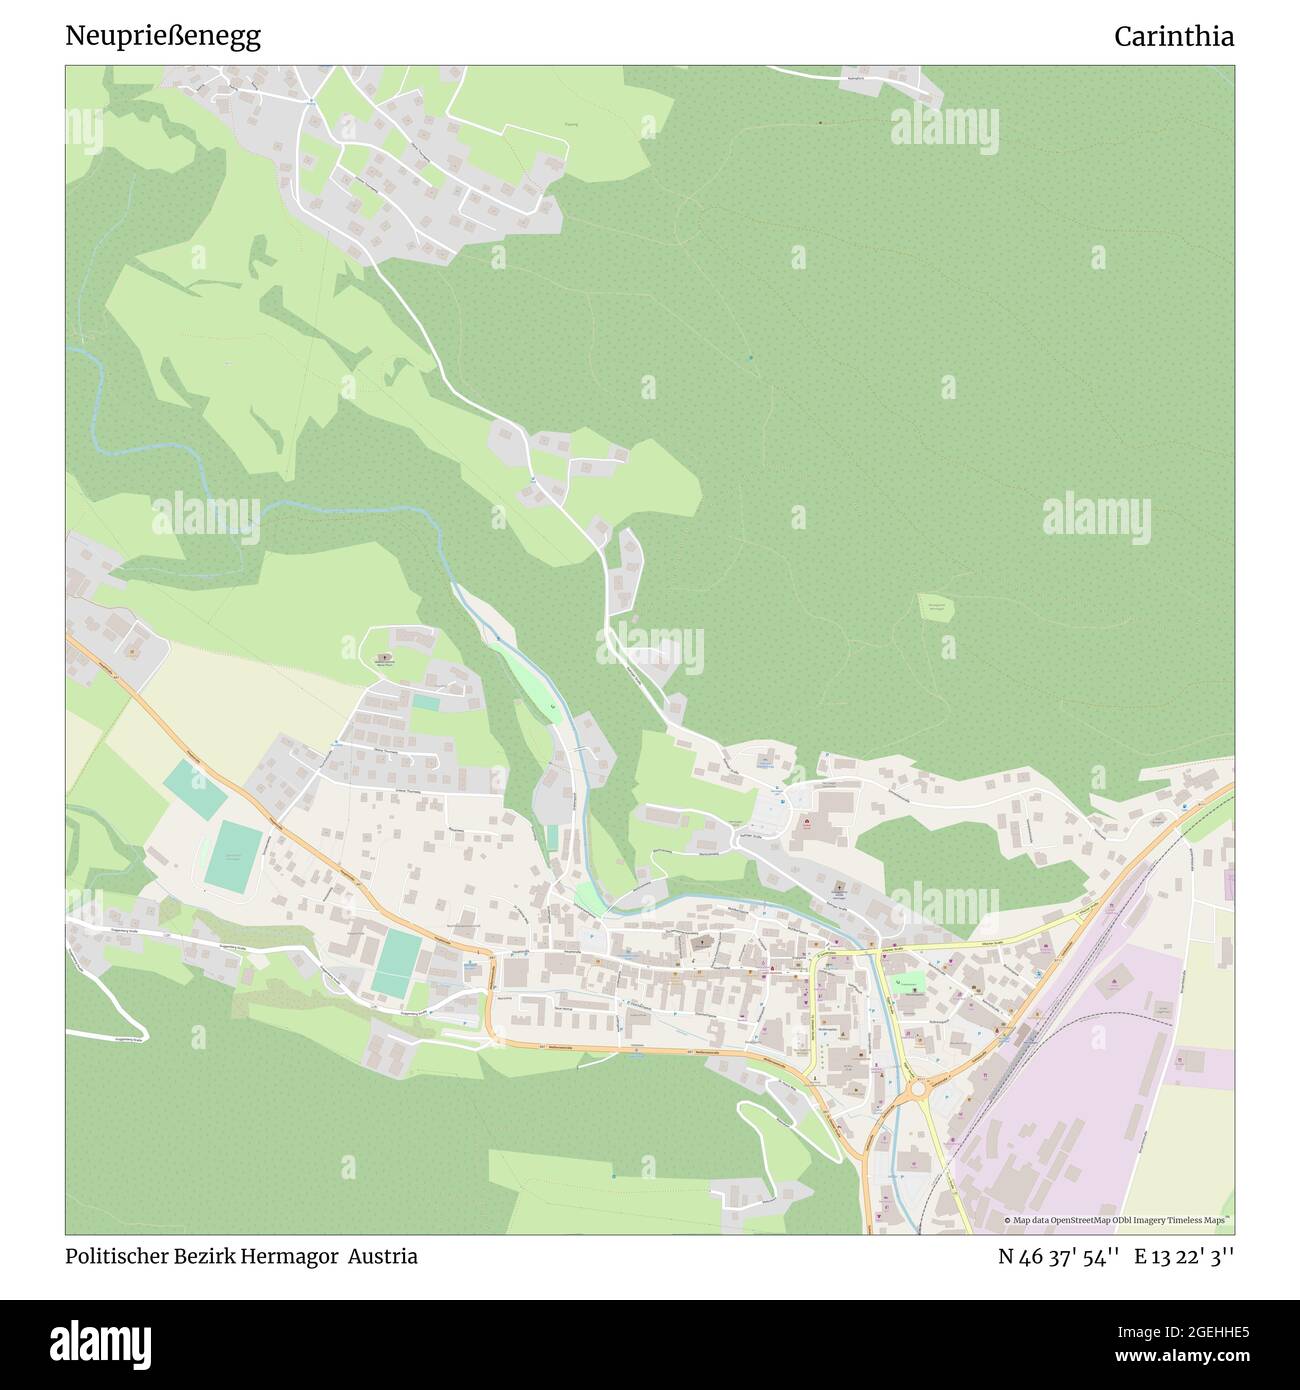 Neuprießenegg, Politischer Bezirk Hermagor, Austria, Carinthia, N 46 37' 54'', E 13 22' 3'', map, Timeless Map published in 2021. Travelers, explorers and adventurers like Florence Nightingale, David Livingstone, Ernest Shackleton, Lewis and Clark and Sherlock Holmes relied on maps to plan travels to the world's most remote corners, Timeless Maps is mapping most locations on the globe, showing the achievement of great dreams Stock Photo